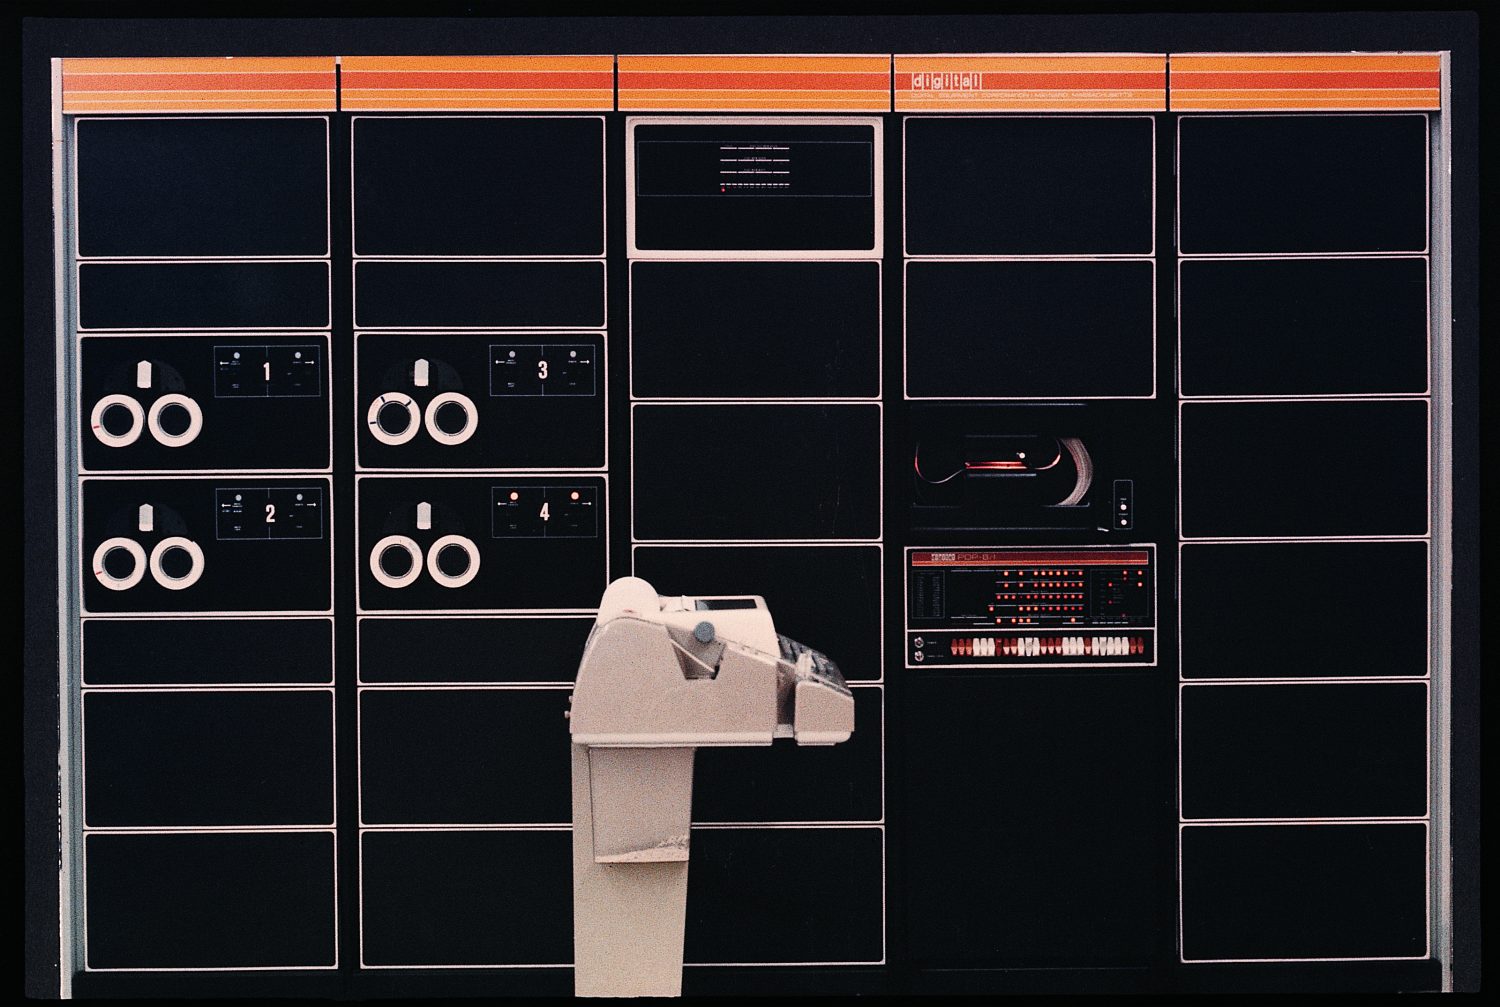 Photo of the Digital Equipment Corporation PDP 8/I, taken in 1968.